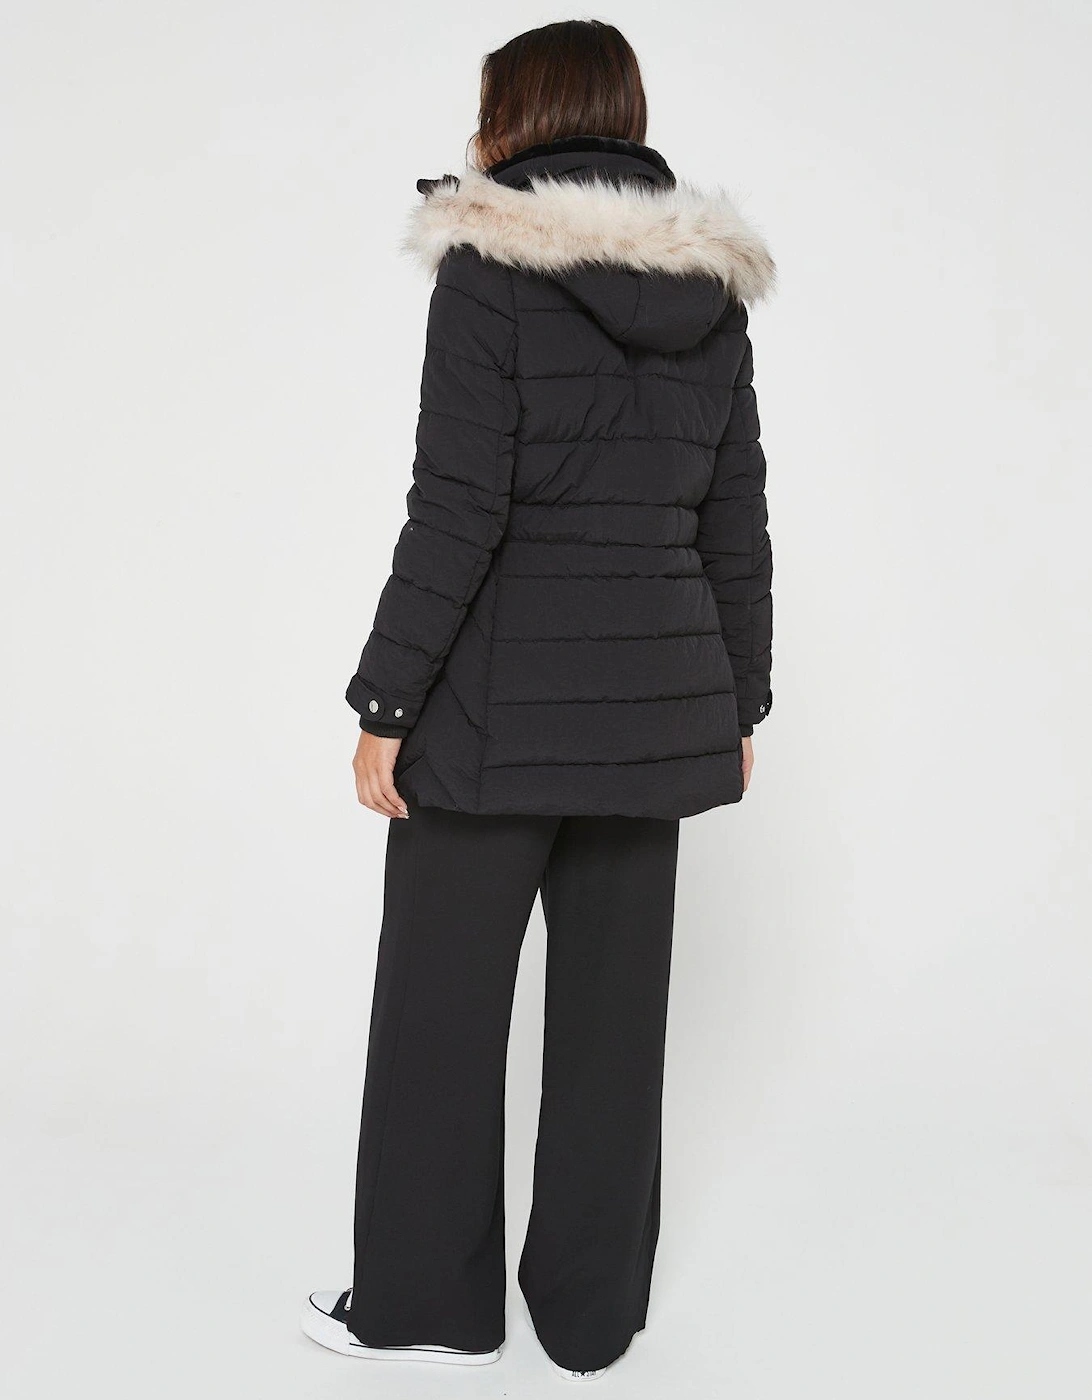 Short Padded Coat With Waist Adjusters - Black